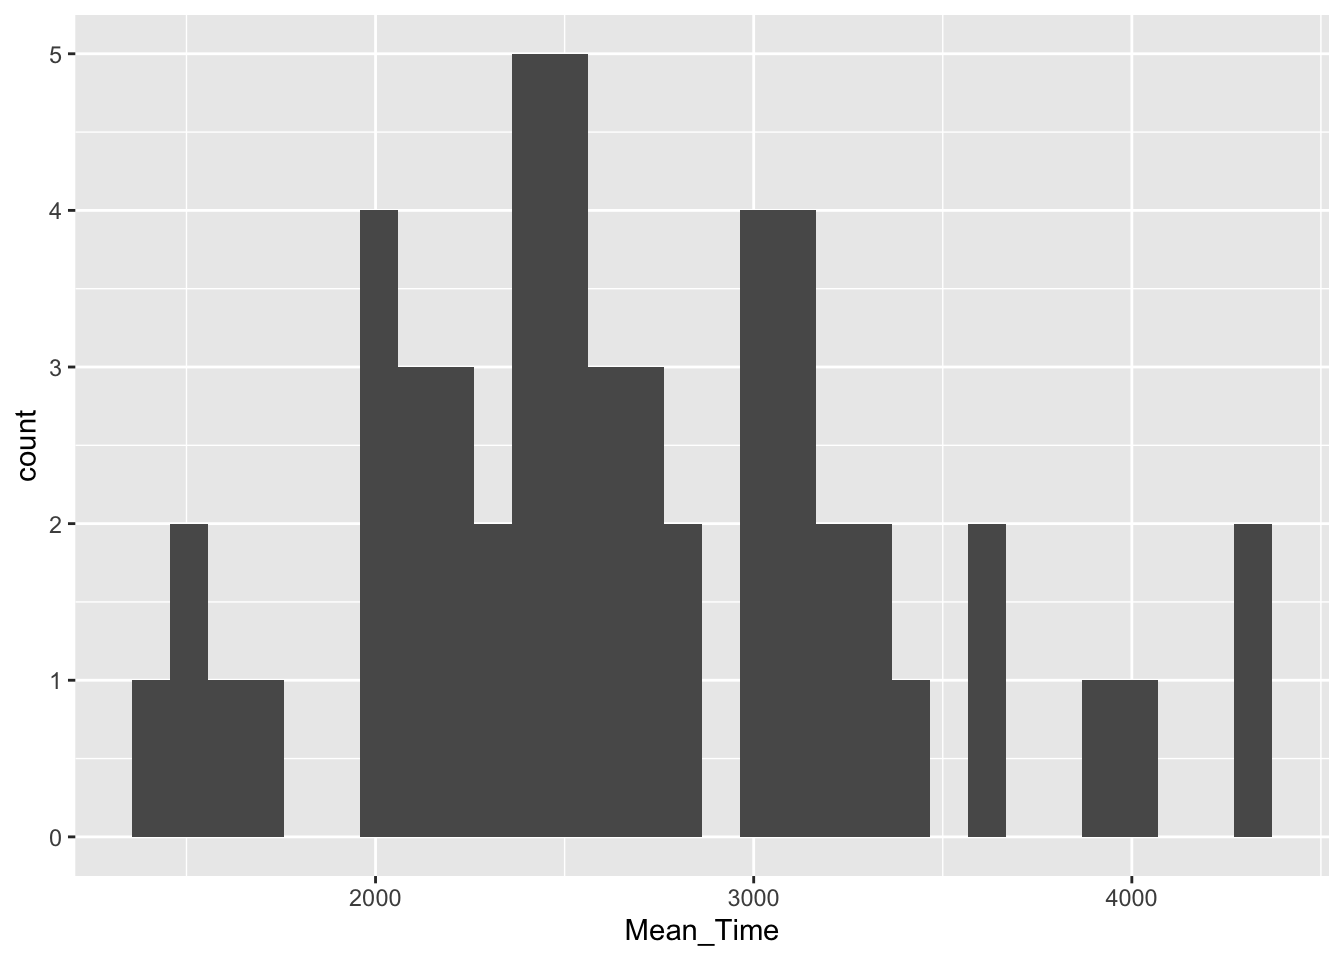 A histogram of distribution of Mean Time counts